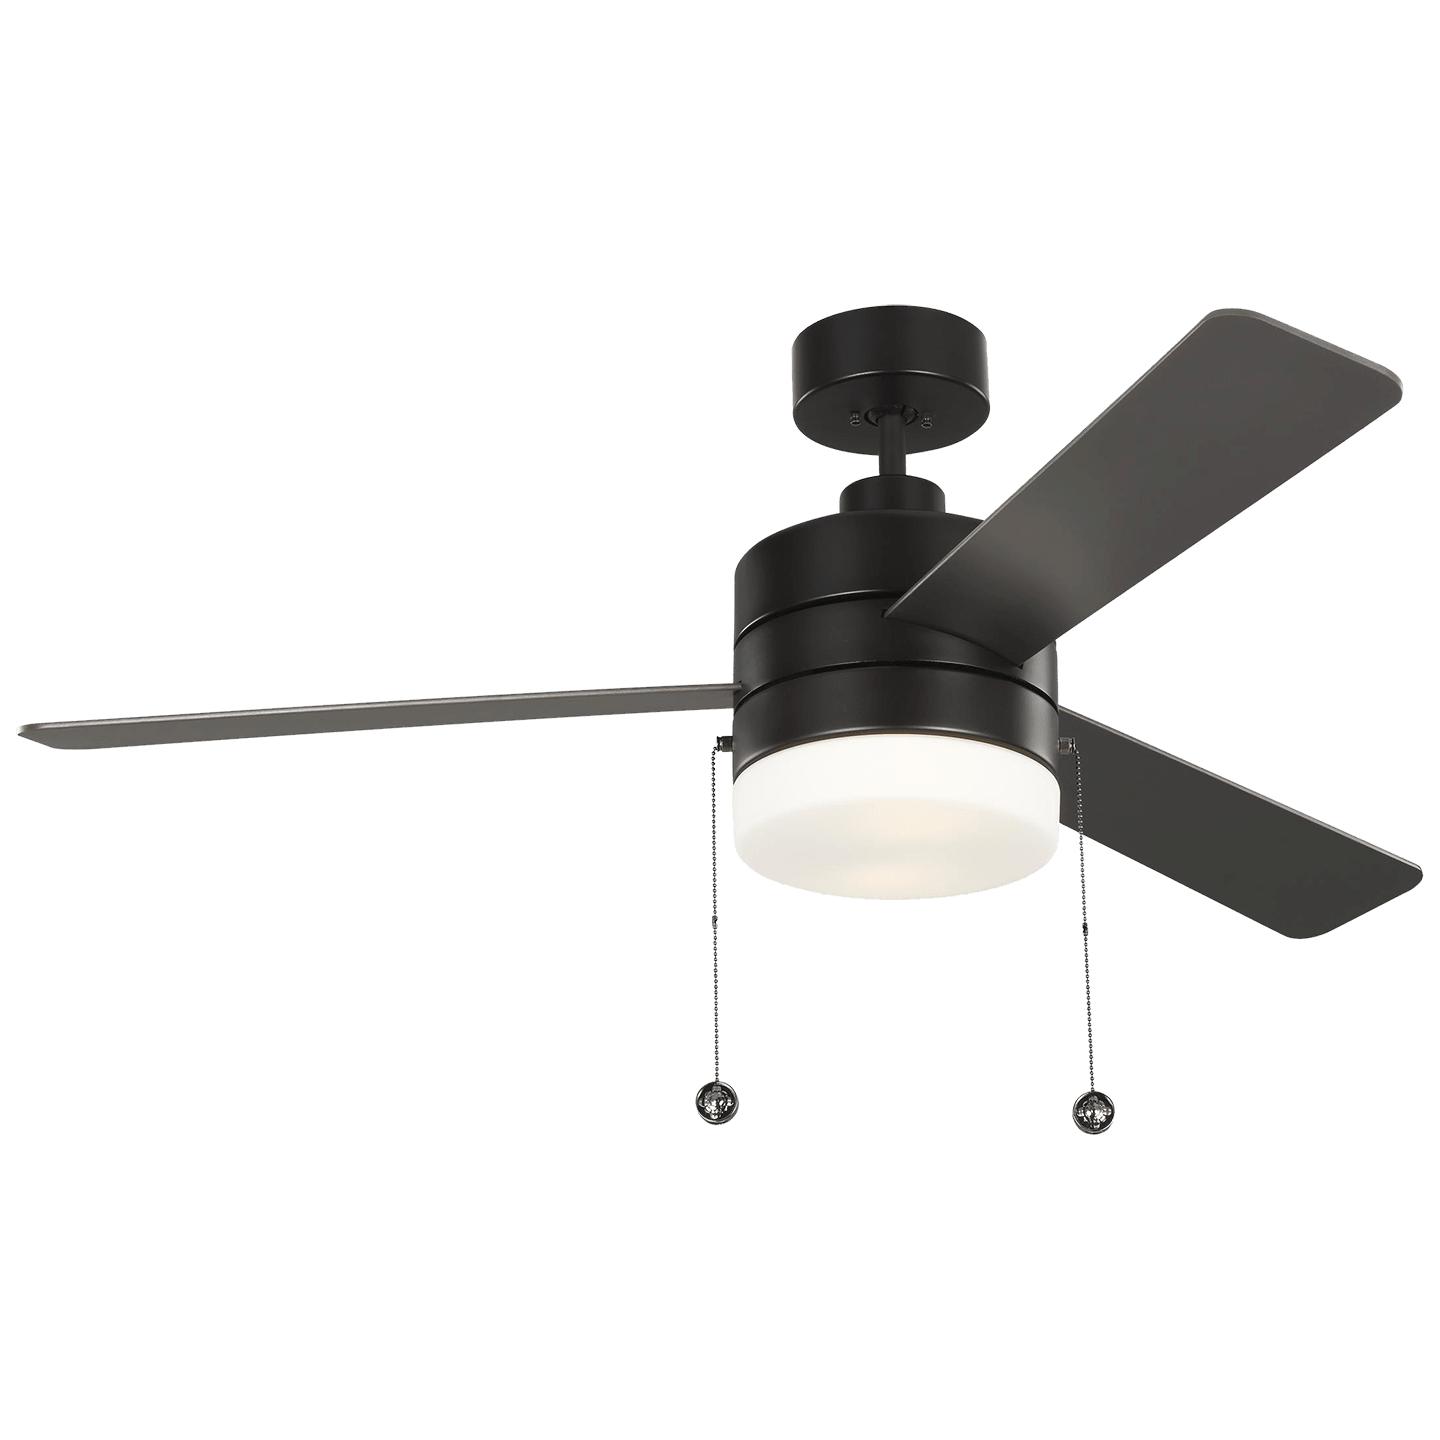 Oil Rubbed Bronze Housing With Oil Rubbed Bronze Blades with Light Kit